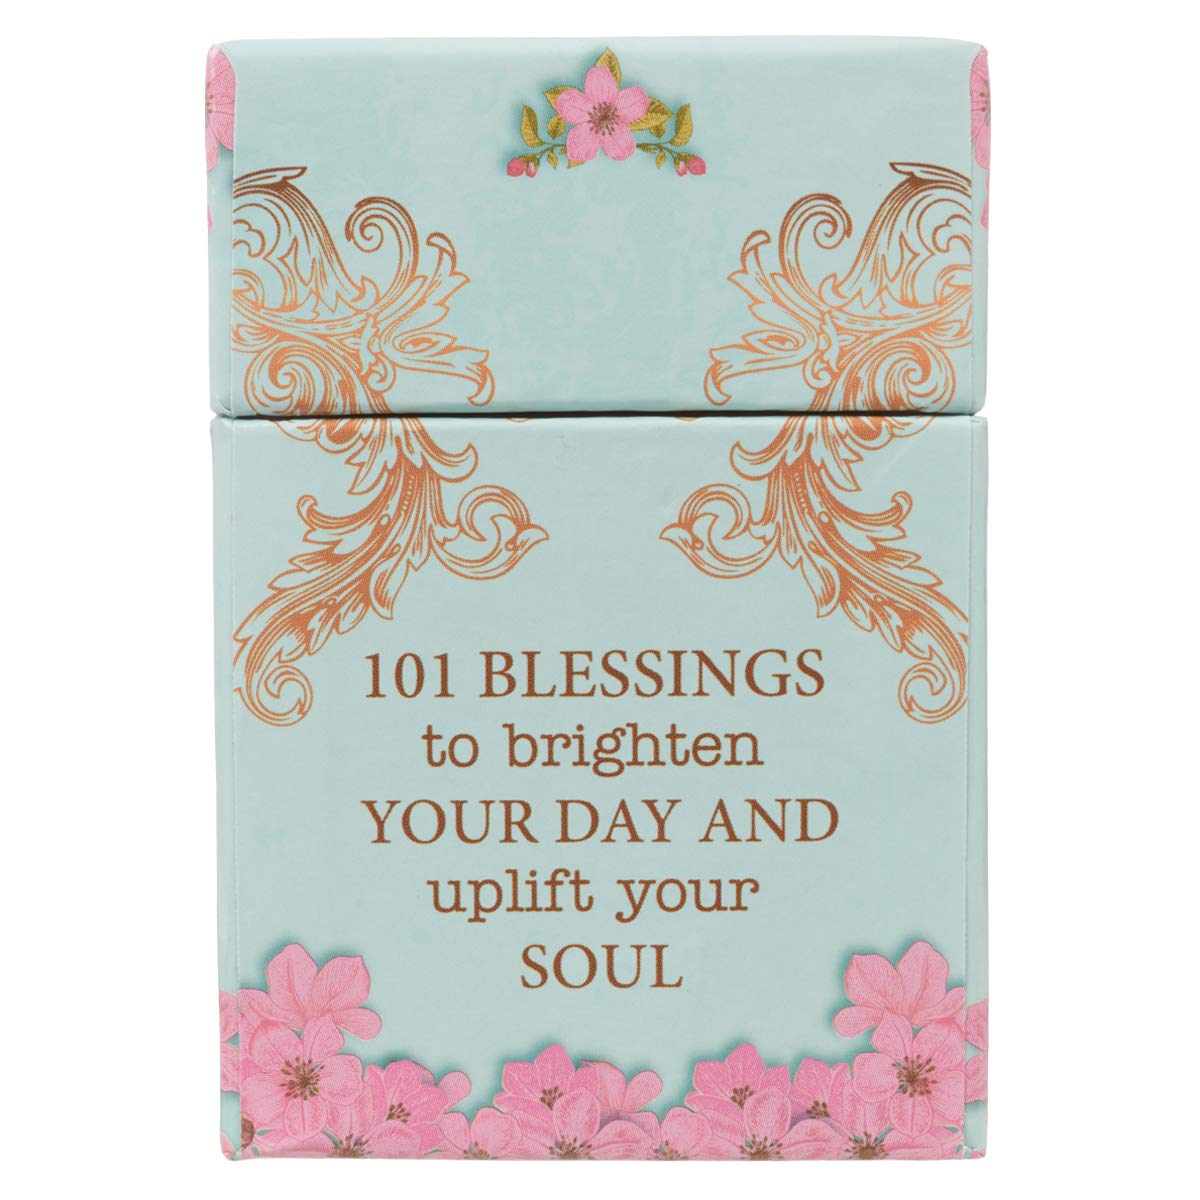 Promises From God for Women Cards - A Box of Blessings